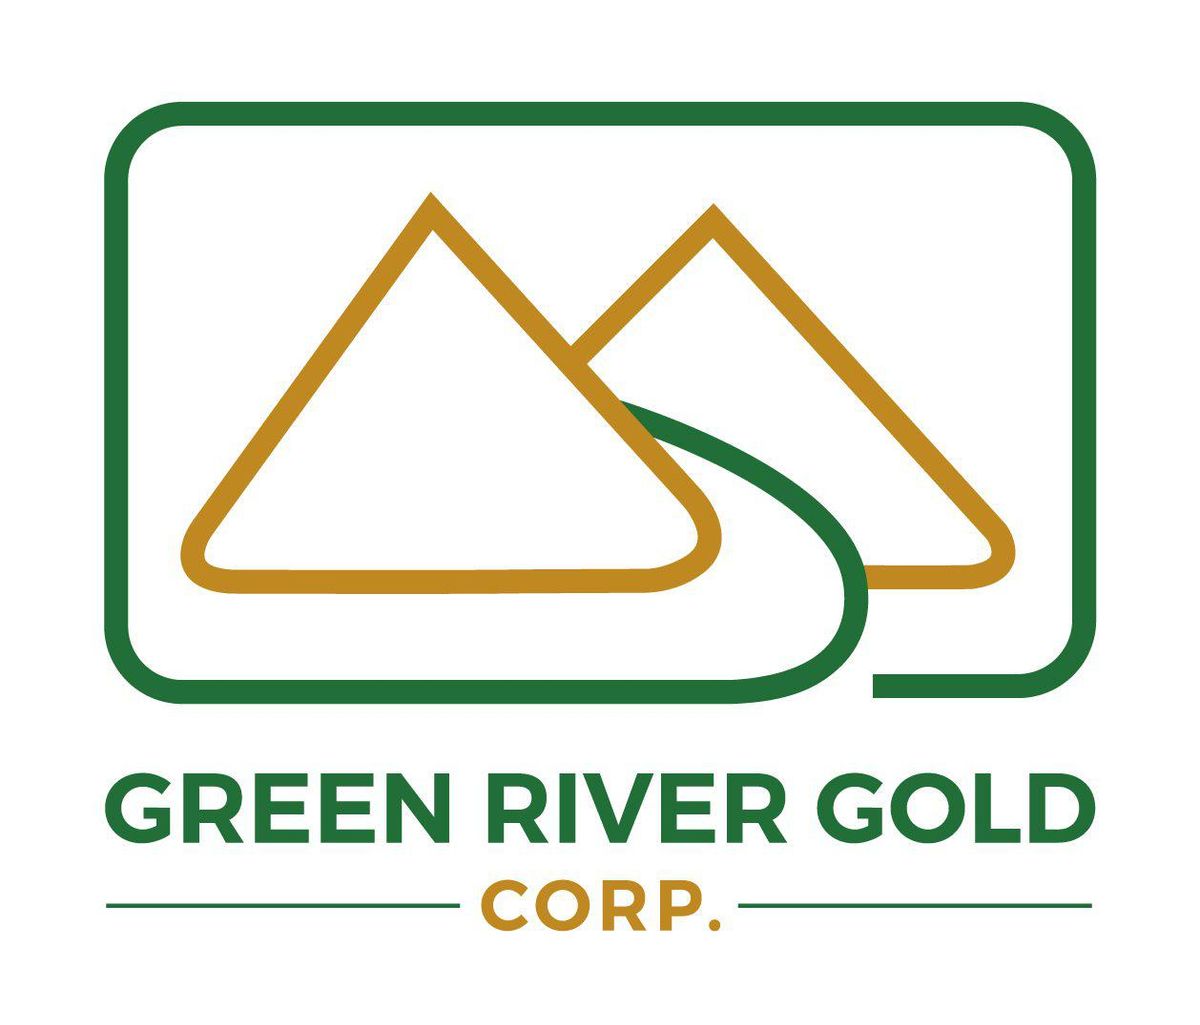 Green River Gold Corp. Airborne Survey Expands Magnetic Anomalies at the Quesnel Nickel/Magnesium/Talc Project to over 14 Linear Kilometers